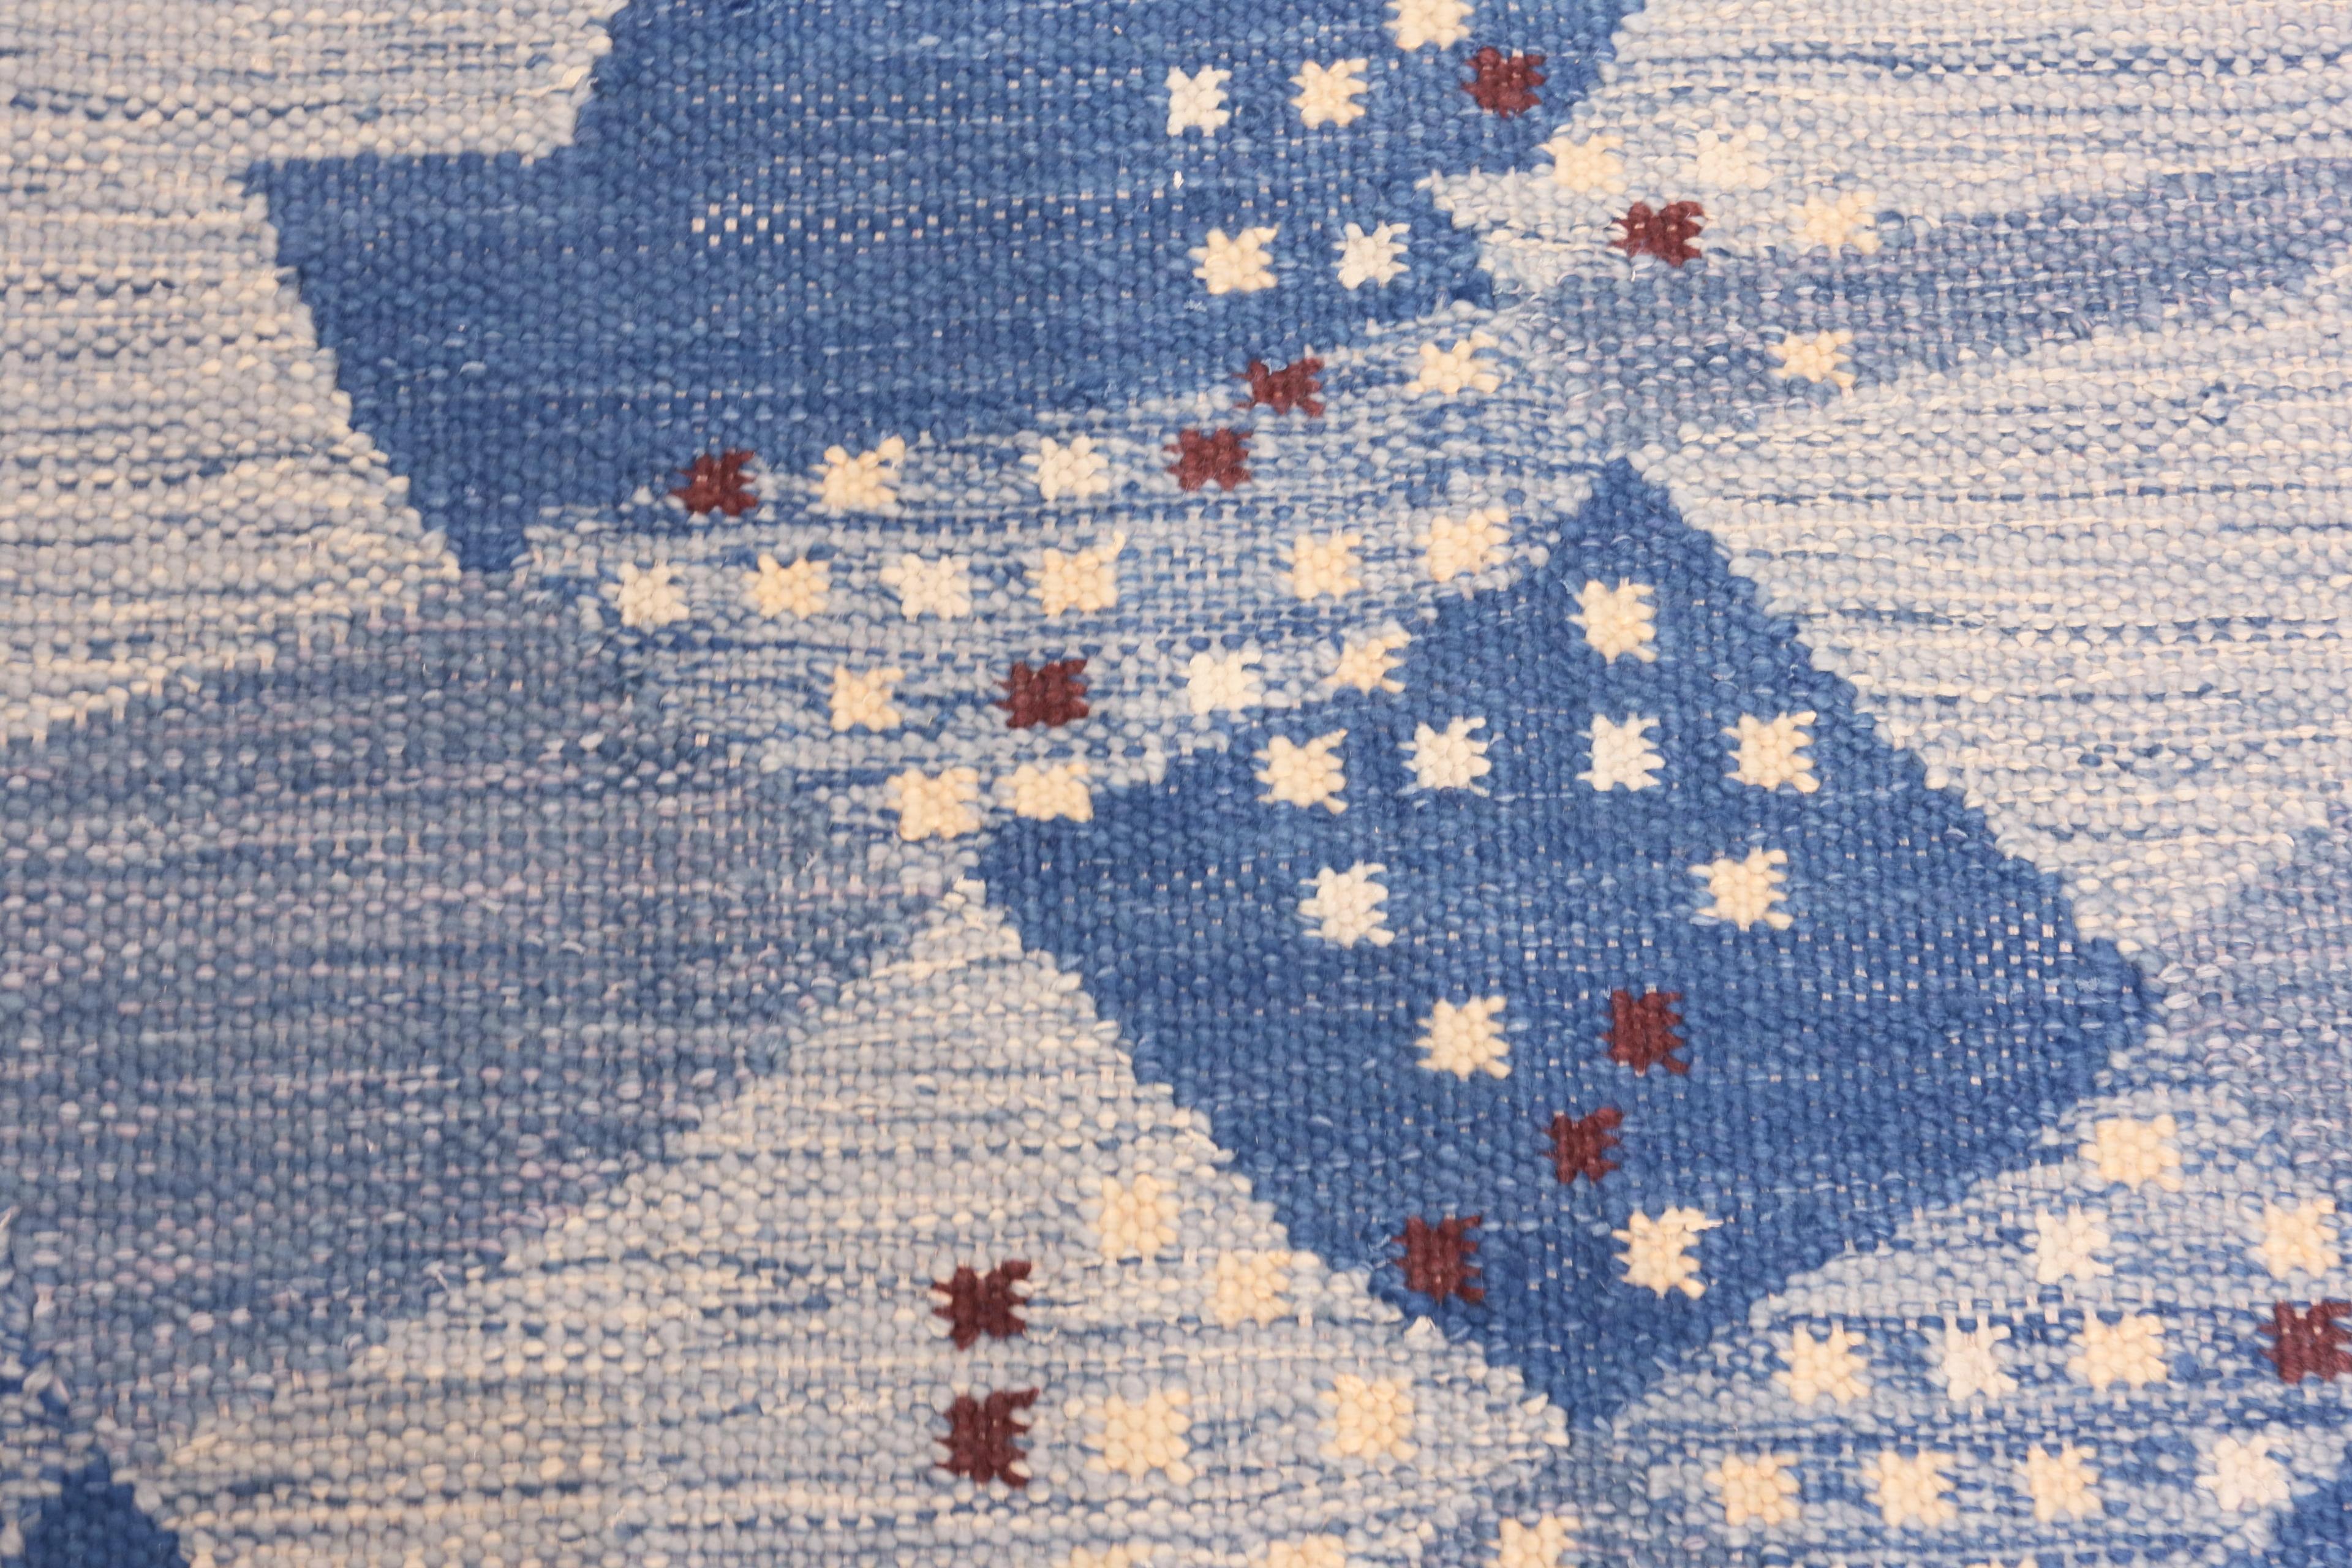 Spectacular Blue Silk And Wool Modern Swedish Design Area Rug, Country of Origin: Modern India Rugs. Circa date: Modern. Size: 8 ft x 10 ft (2.44 m x 3.05 m)

